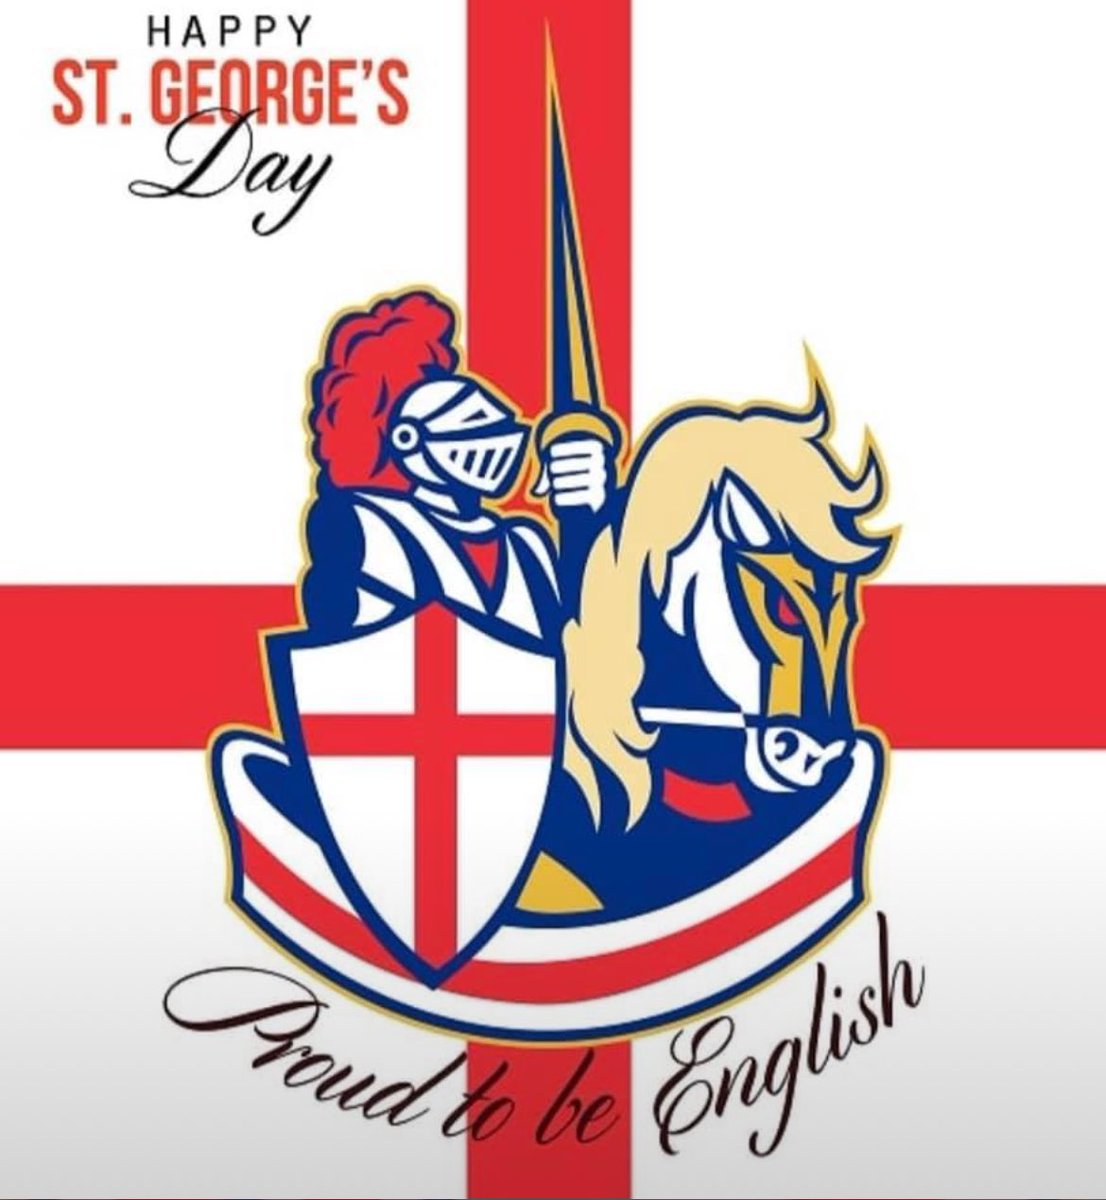 Happy St George’s Day. Forever English 🏴󠁧󠁢󠁥󠁮󠁧󠁿